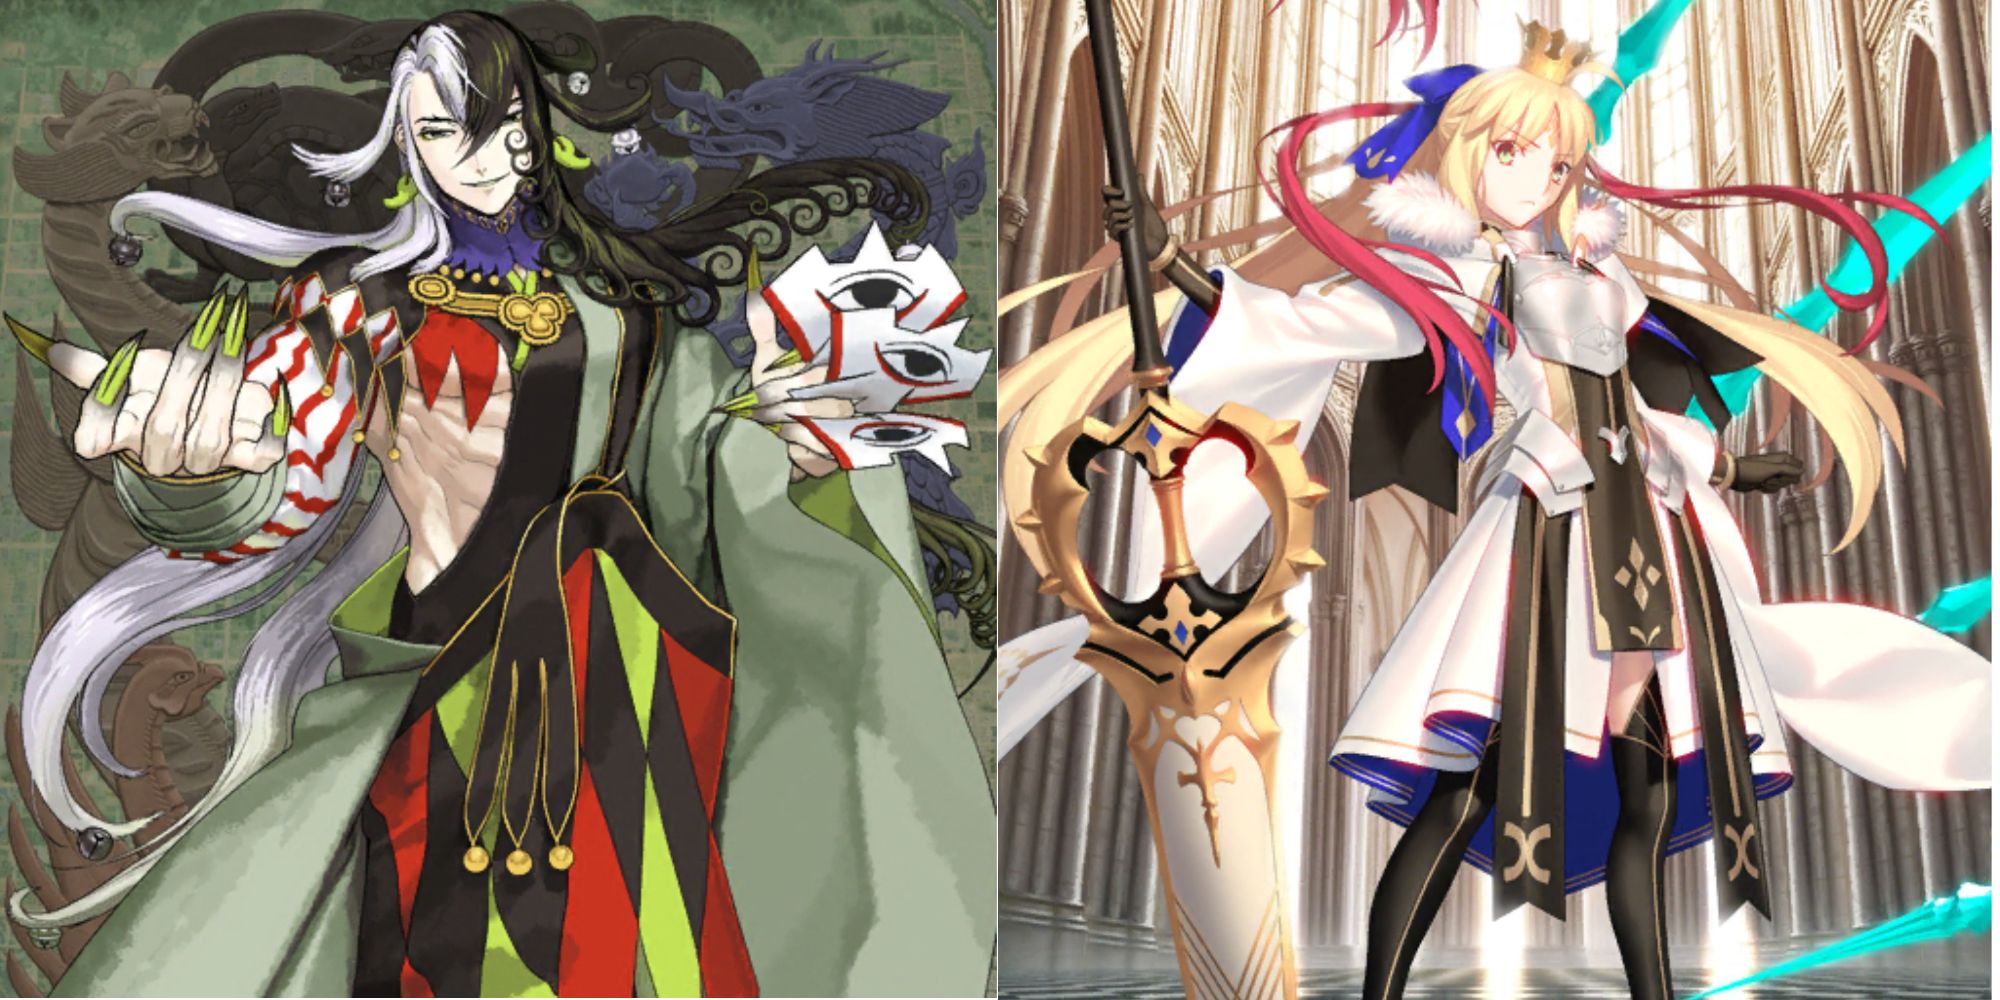 Manga Fate/Grand Order The Top 10 Servants Coming to English, Ranked 🍀